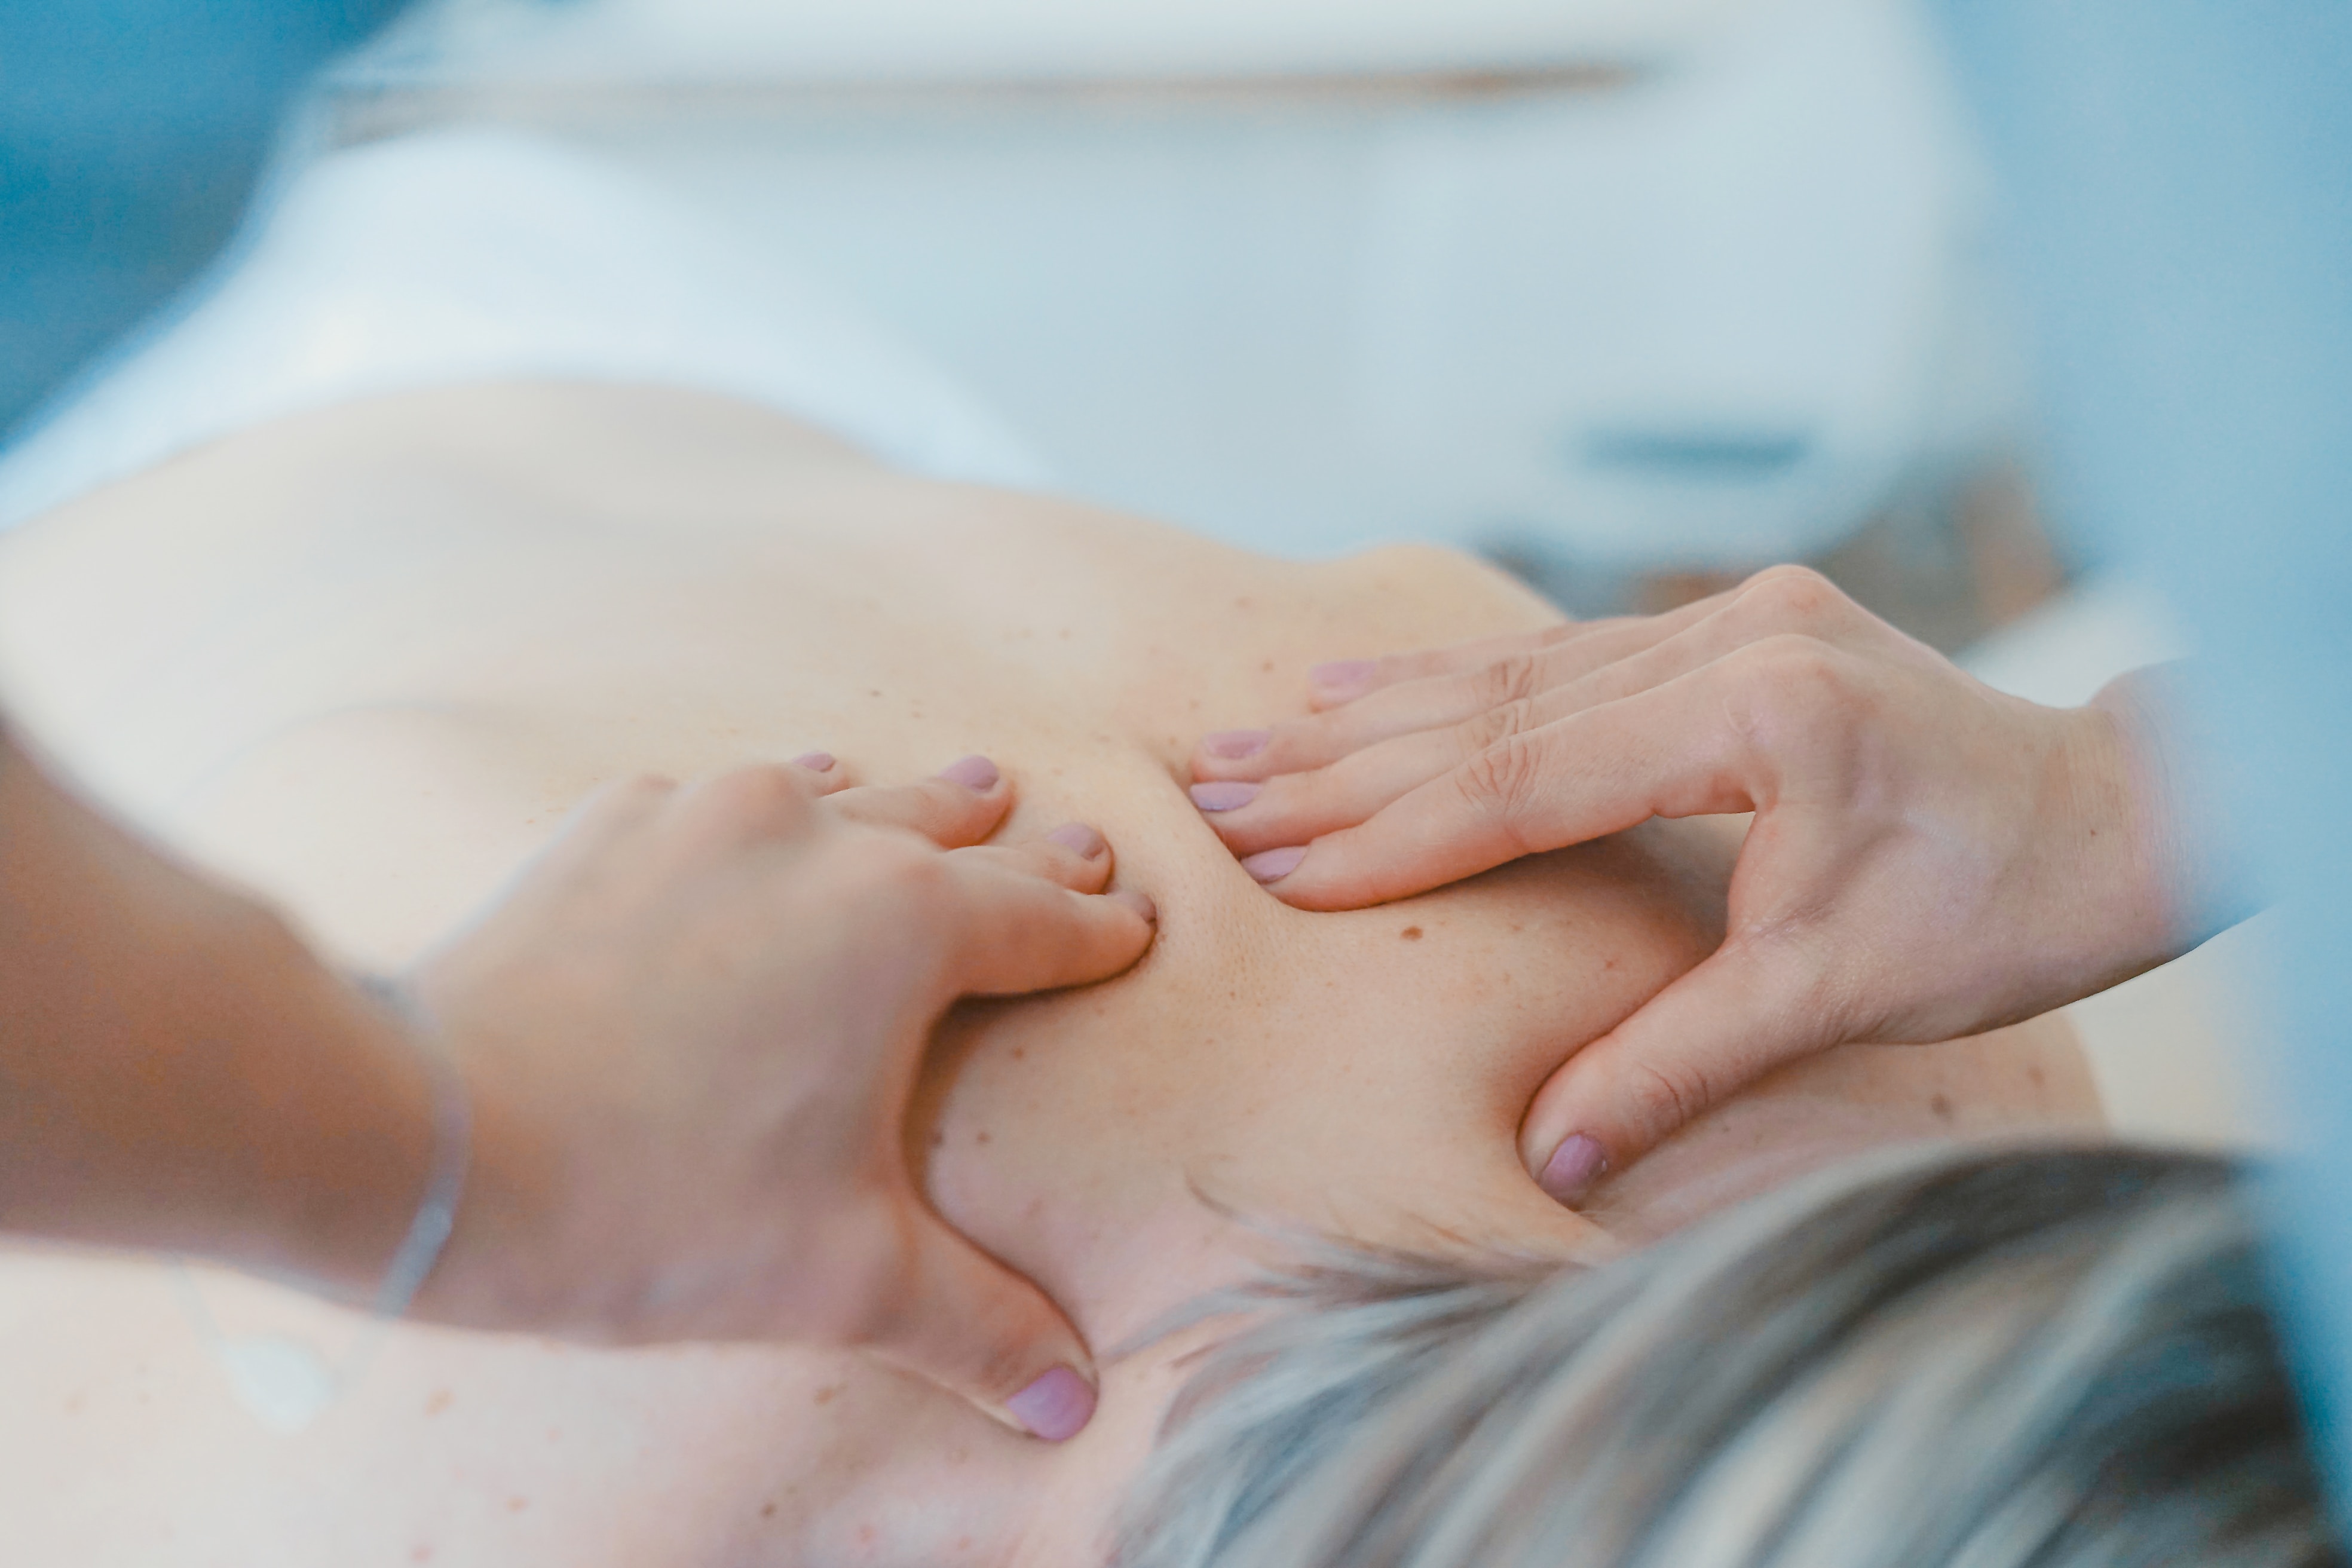 woman's hands massaging someones back at a spa